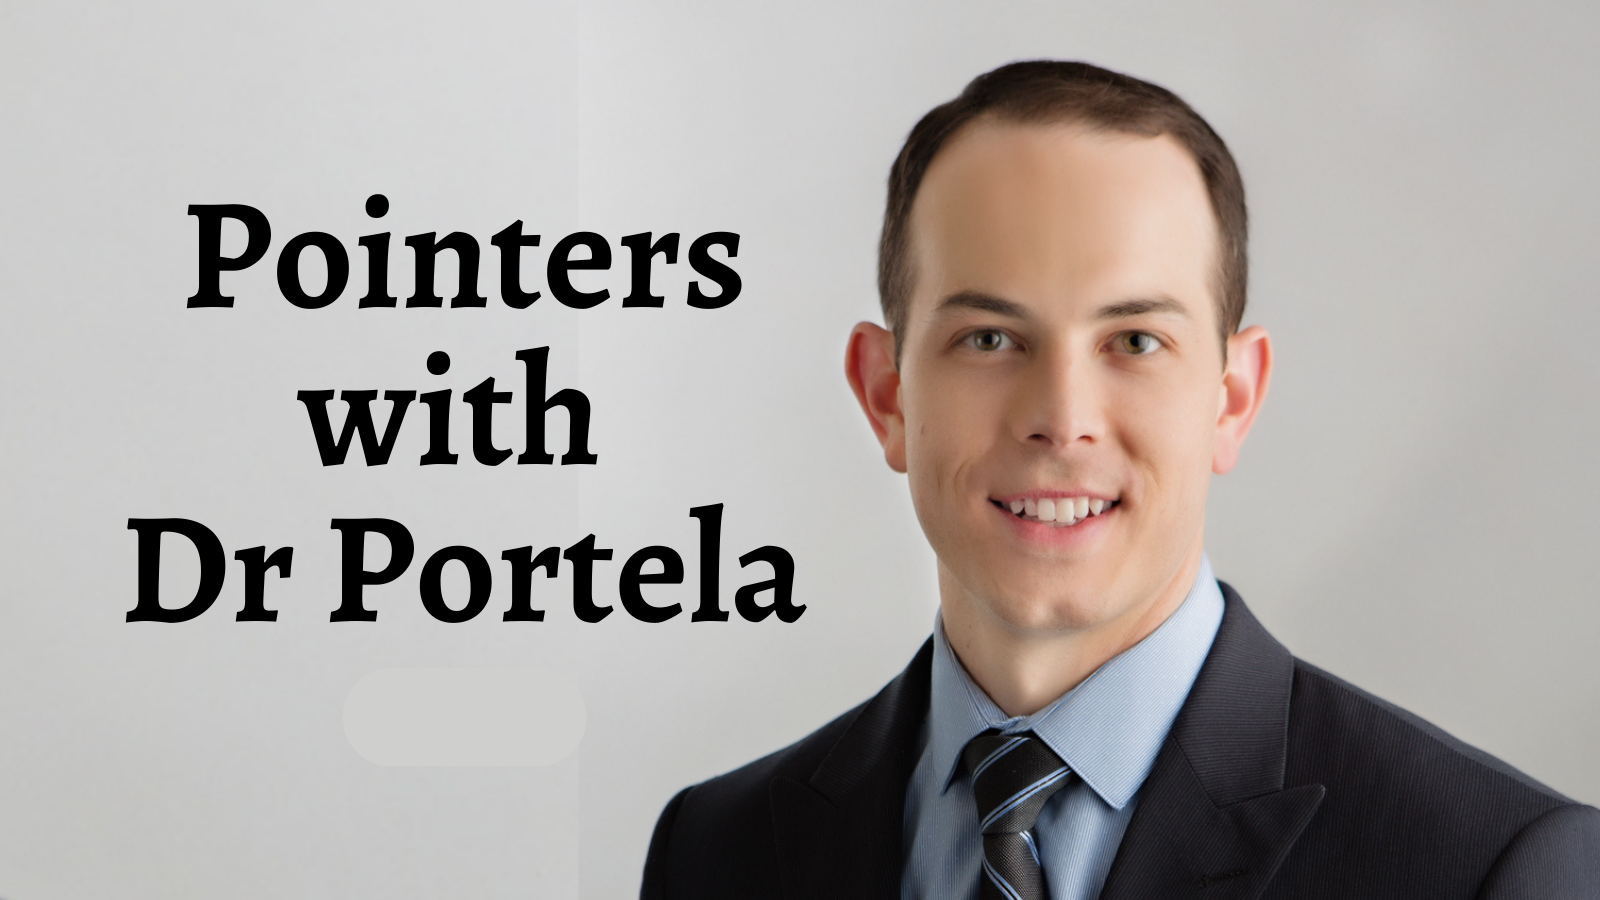 Pointers with Dr Portela: The End of the Year Product Review